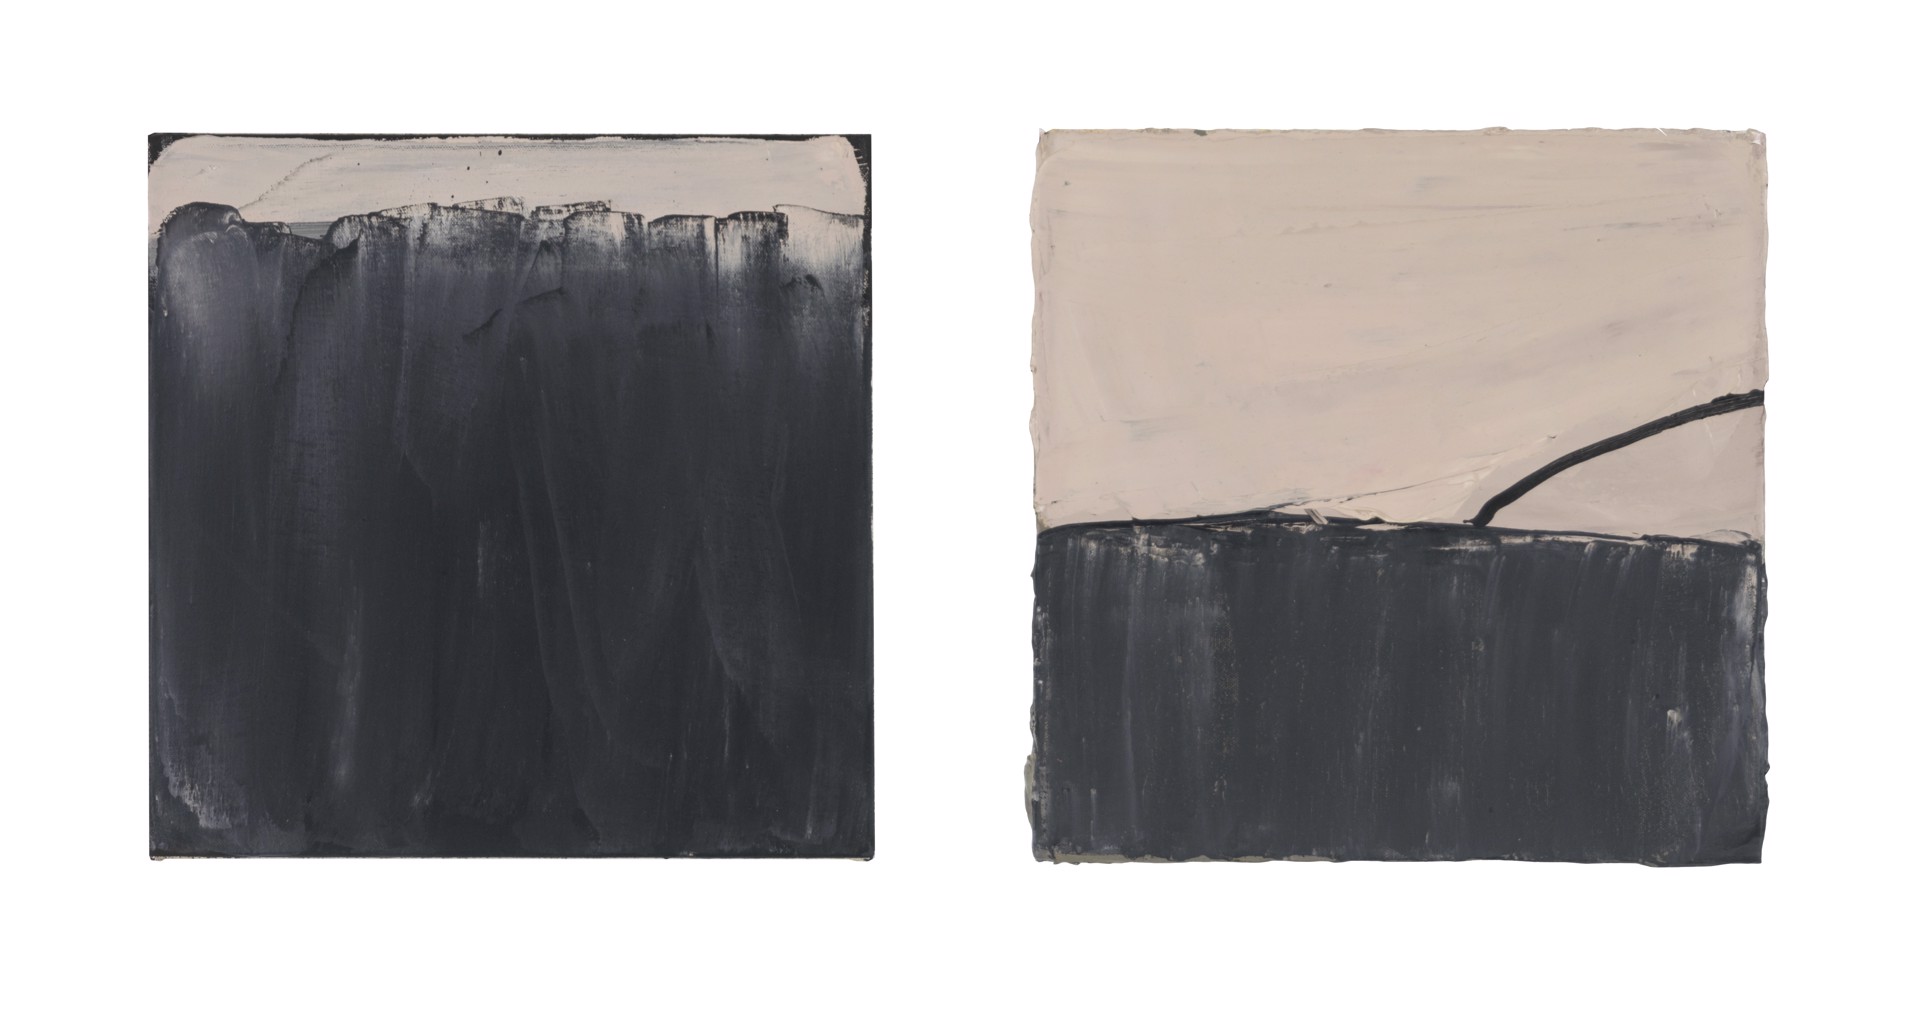 Black Wash on Pale Pink and Thin Black Line on Pink diptych by Anastasia Faiella